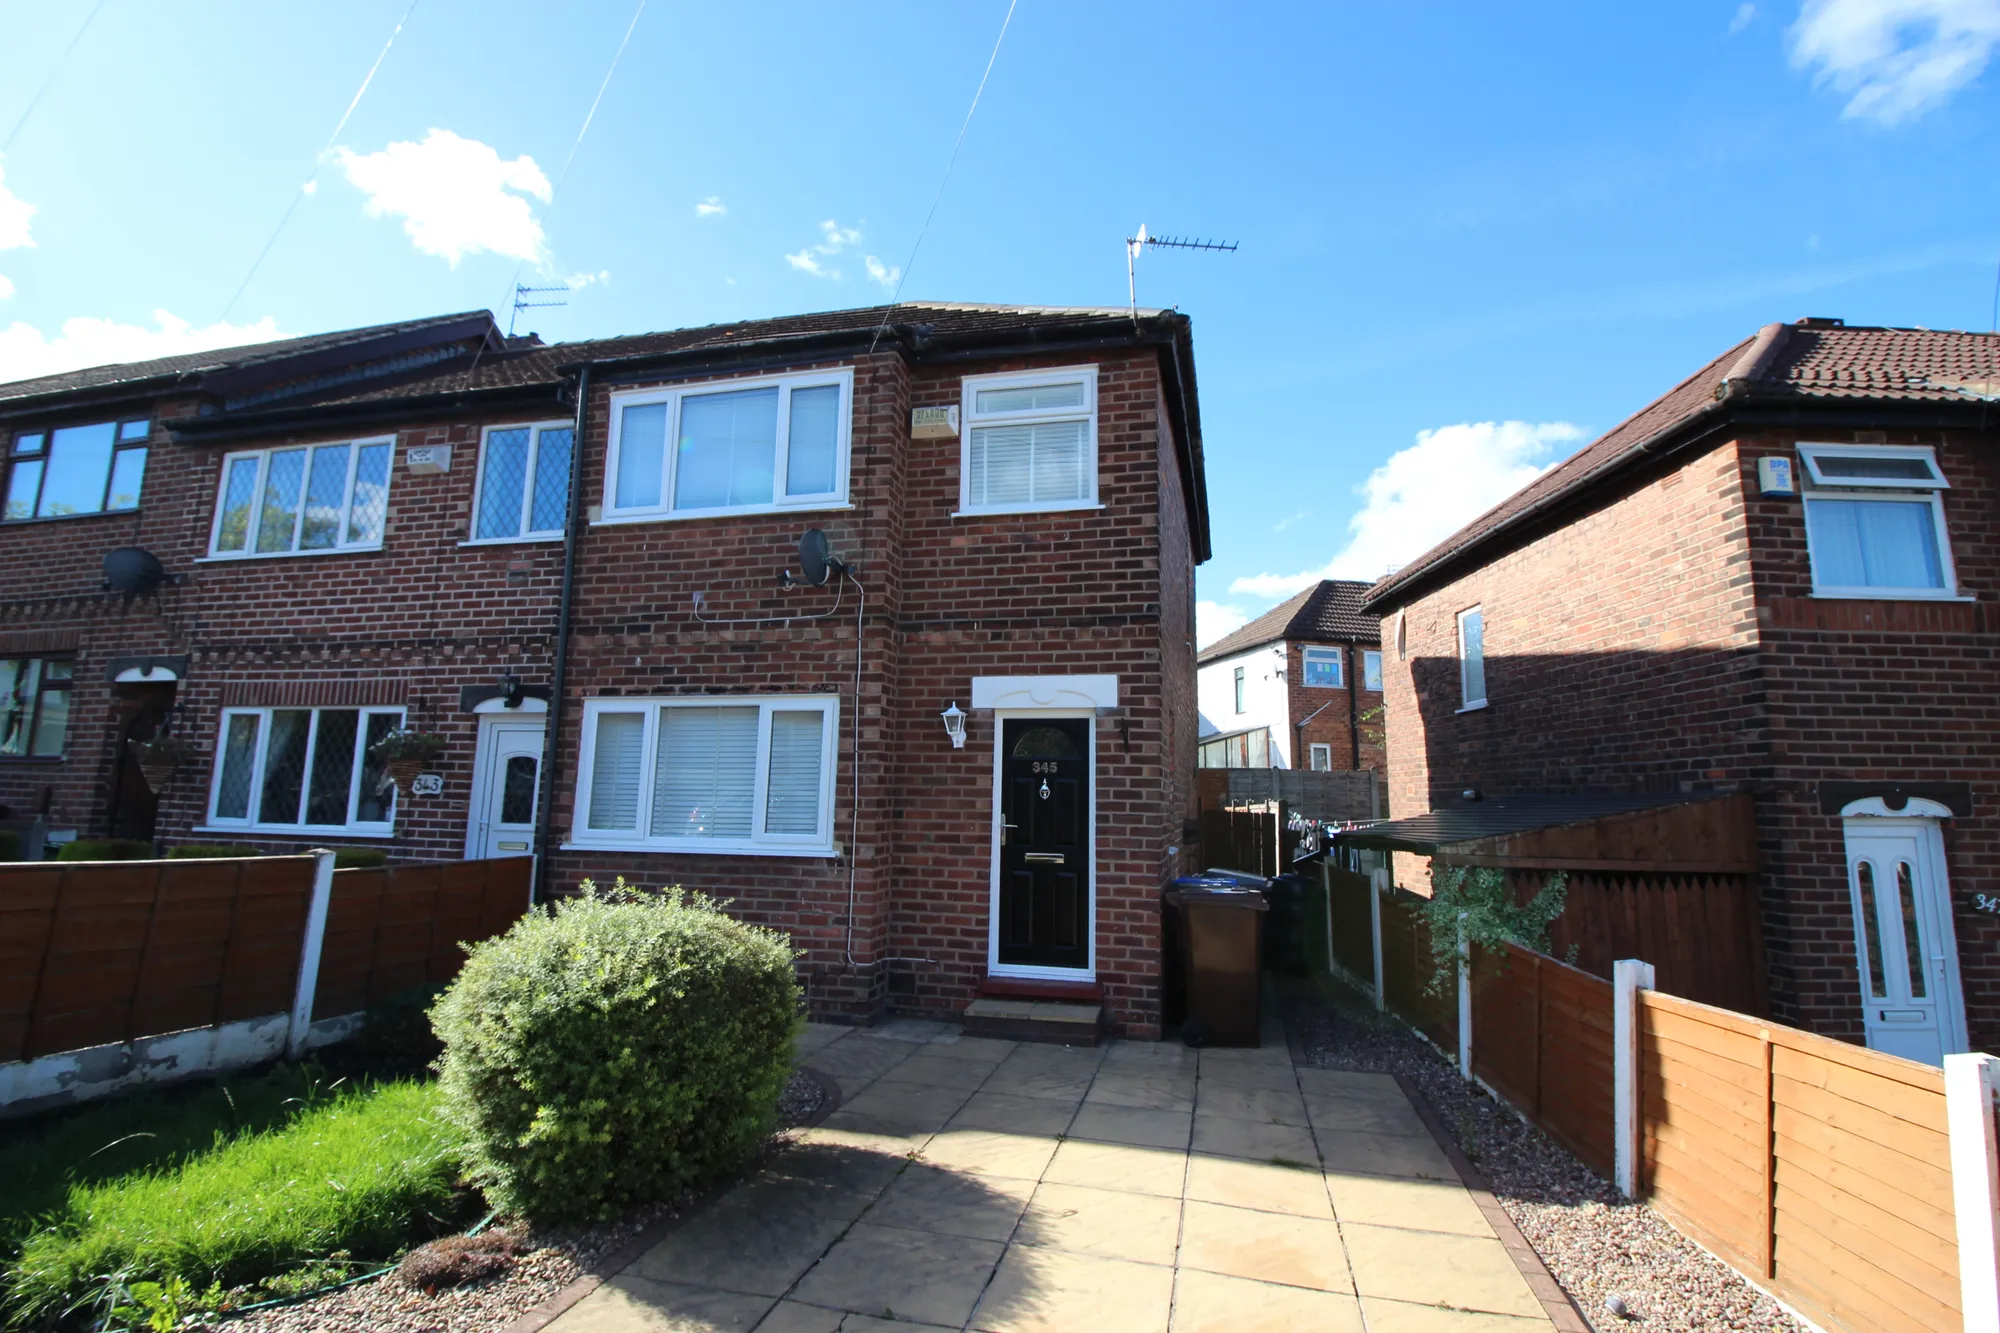 3 bed terraced house to rent in Greenside Lane, Manchester - Property Image 1